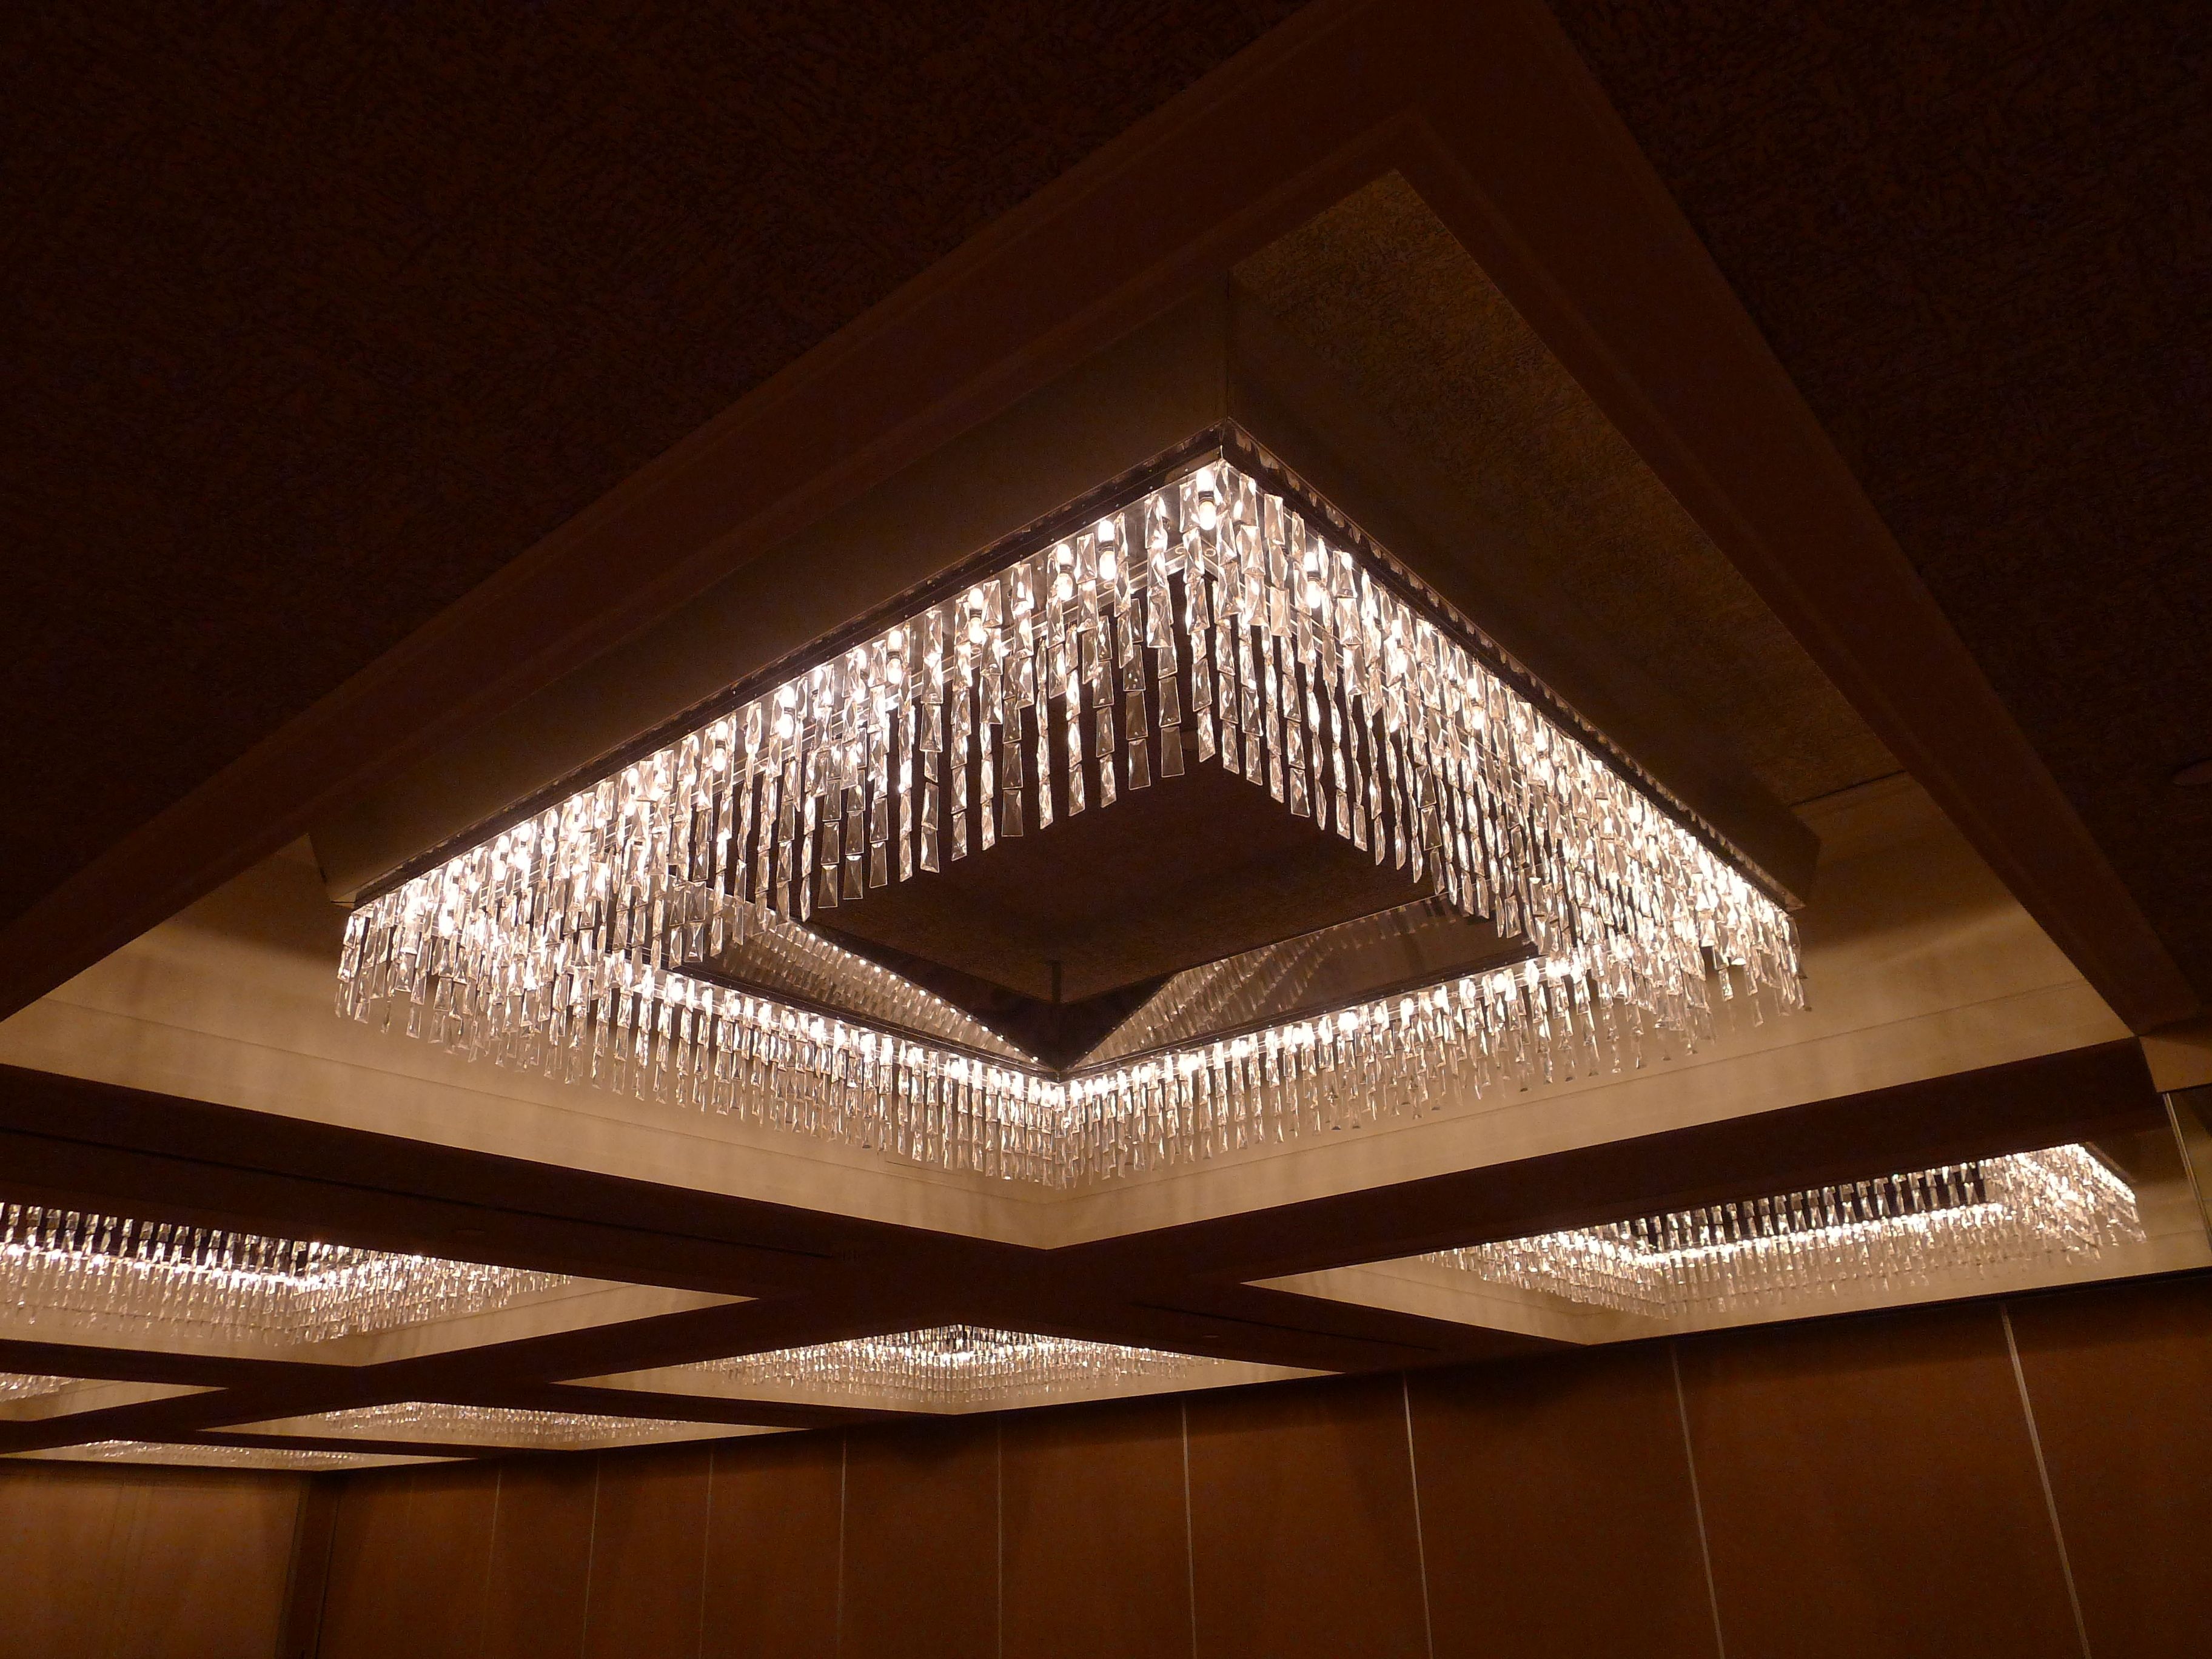 101 Best Images About Room Hotel Ballrooms On Pinterest Regarding Ballroom Chandeliers (View 8 of 15)